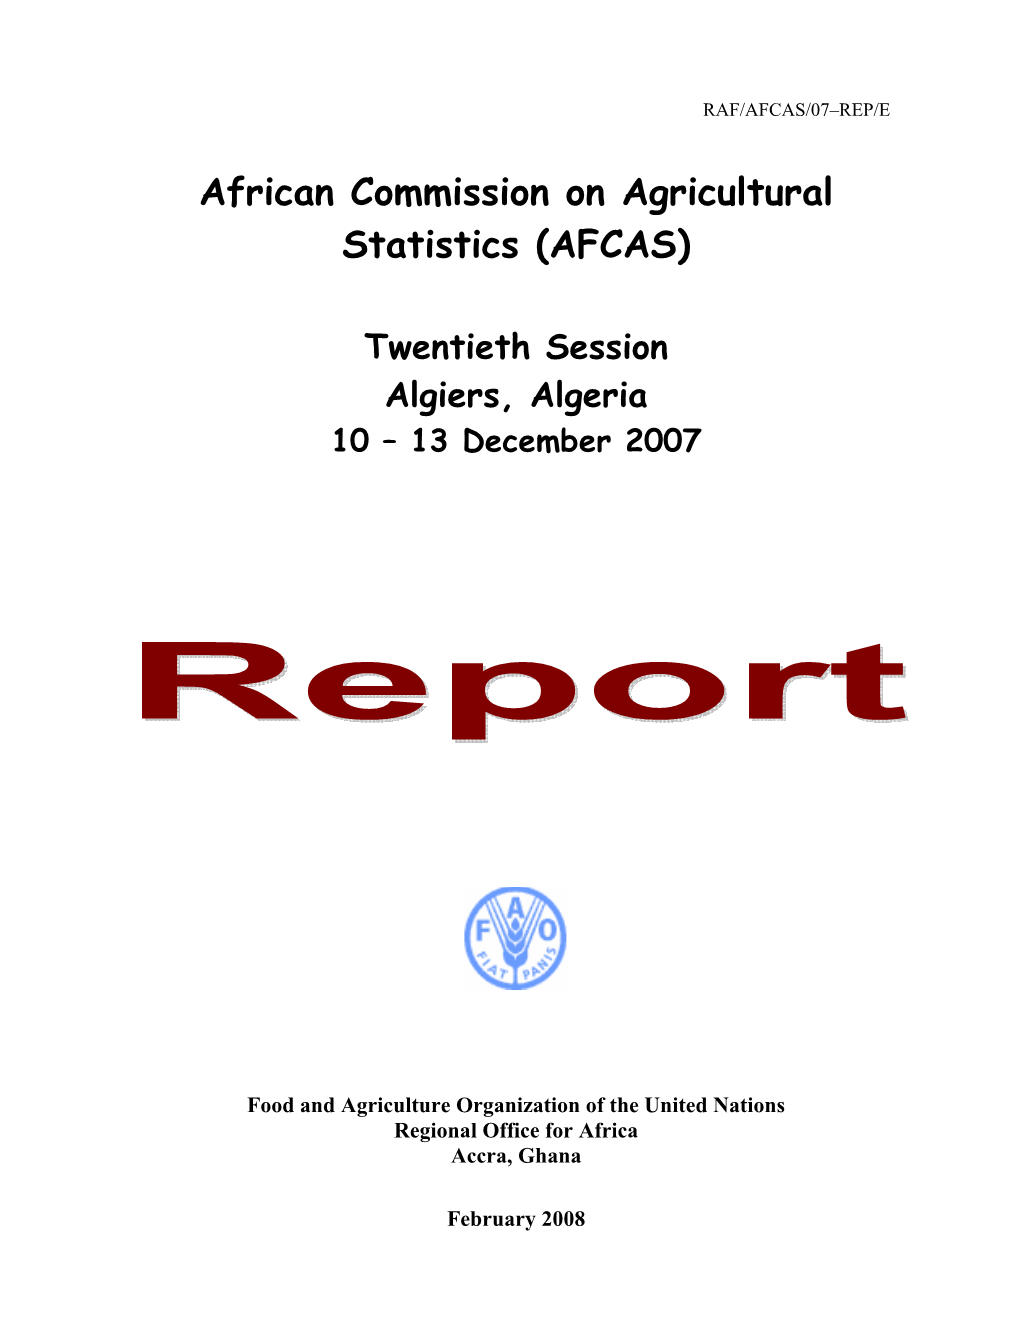 African Commission on Agricultural Statistics (AFCAS)